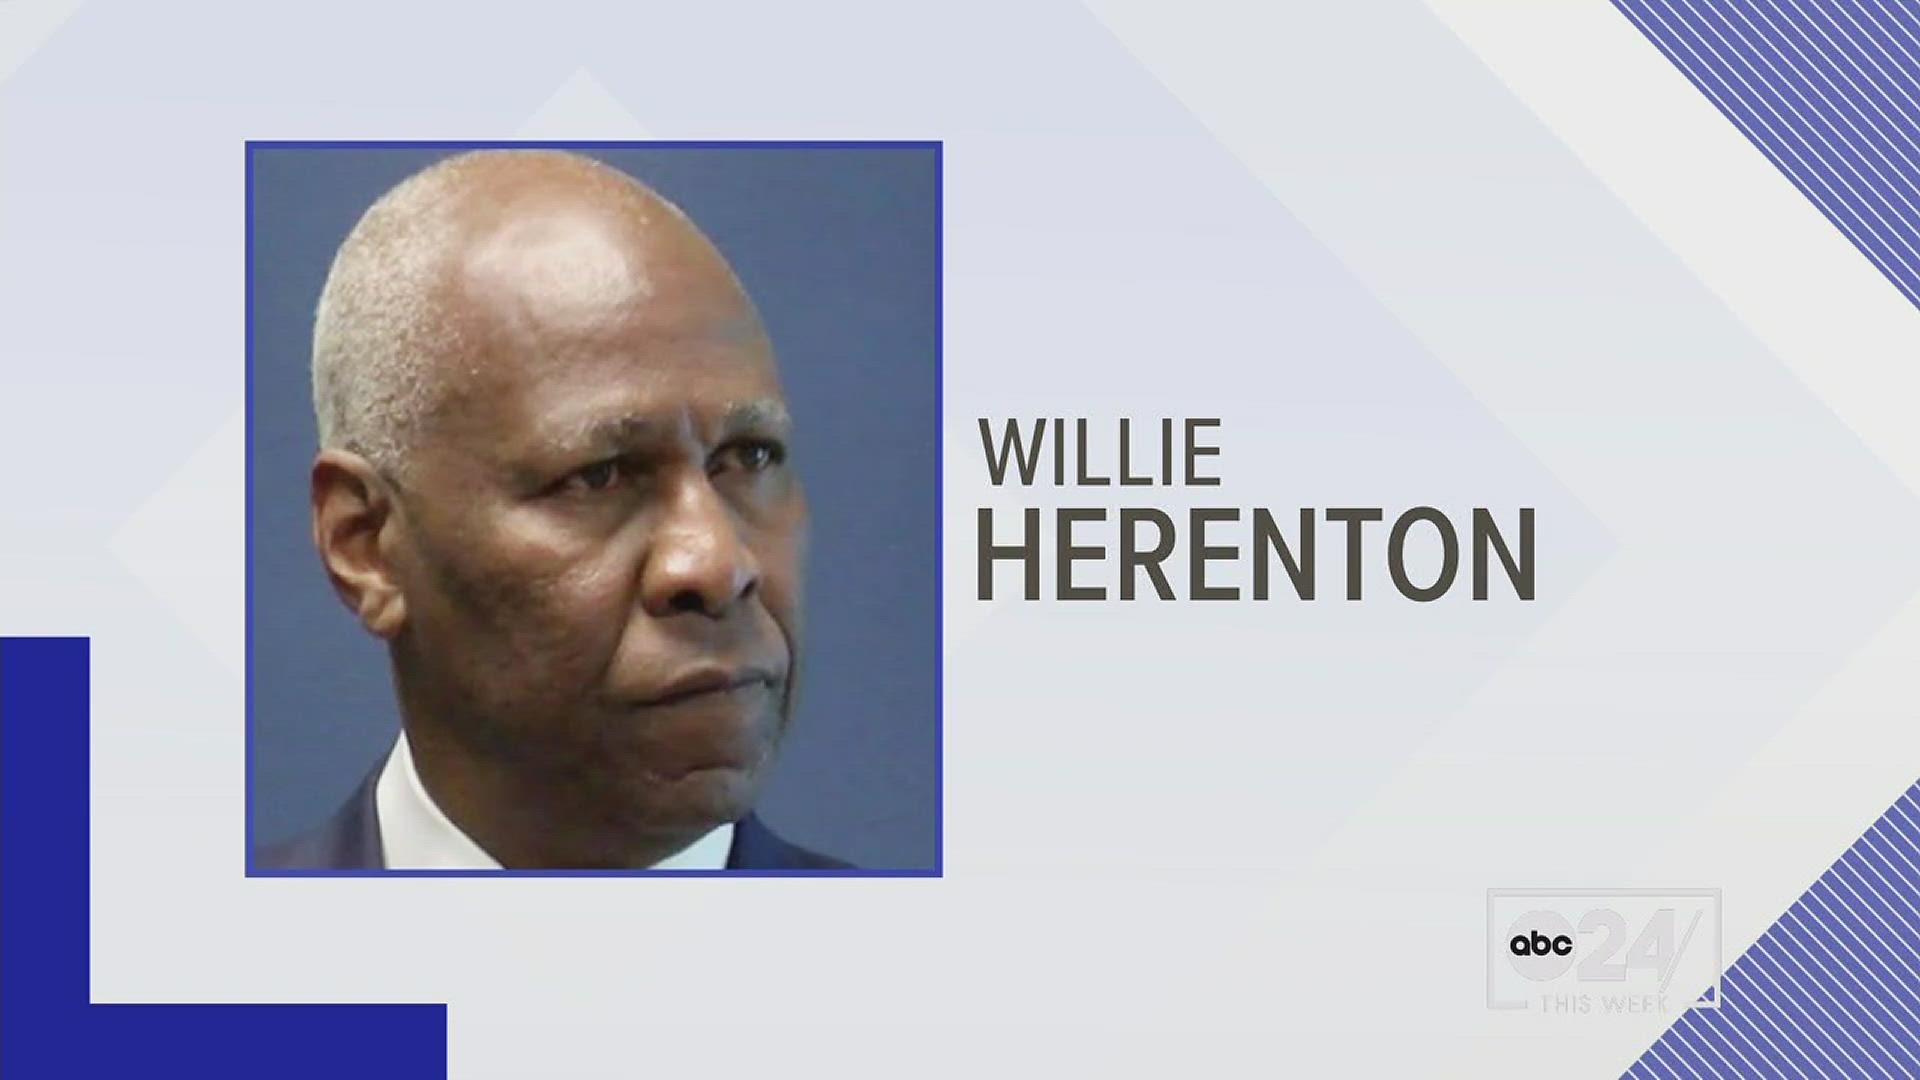 Former Memphis mayor Willie Herenton was invited to participate in the “Your Voice, Your Vote: 2023 Mayoral Debate” on ABC24, but he chose not to attend.